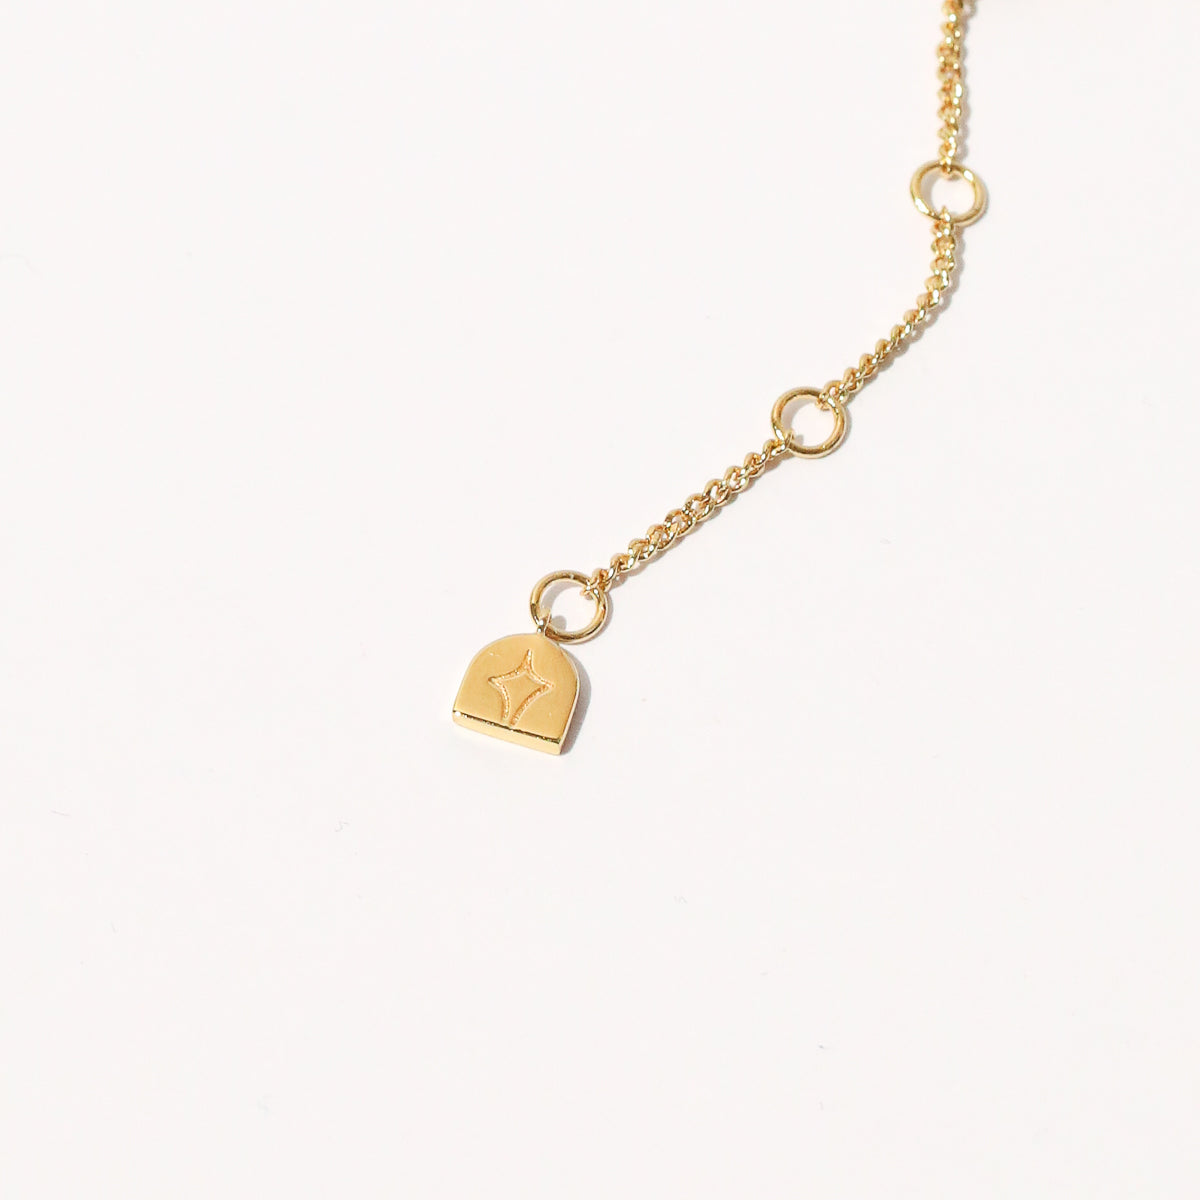 Cosmic Star Bar Necklace in Gold end of necklace